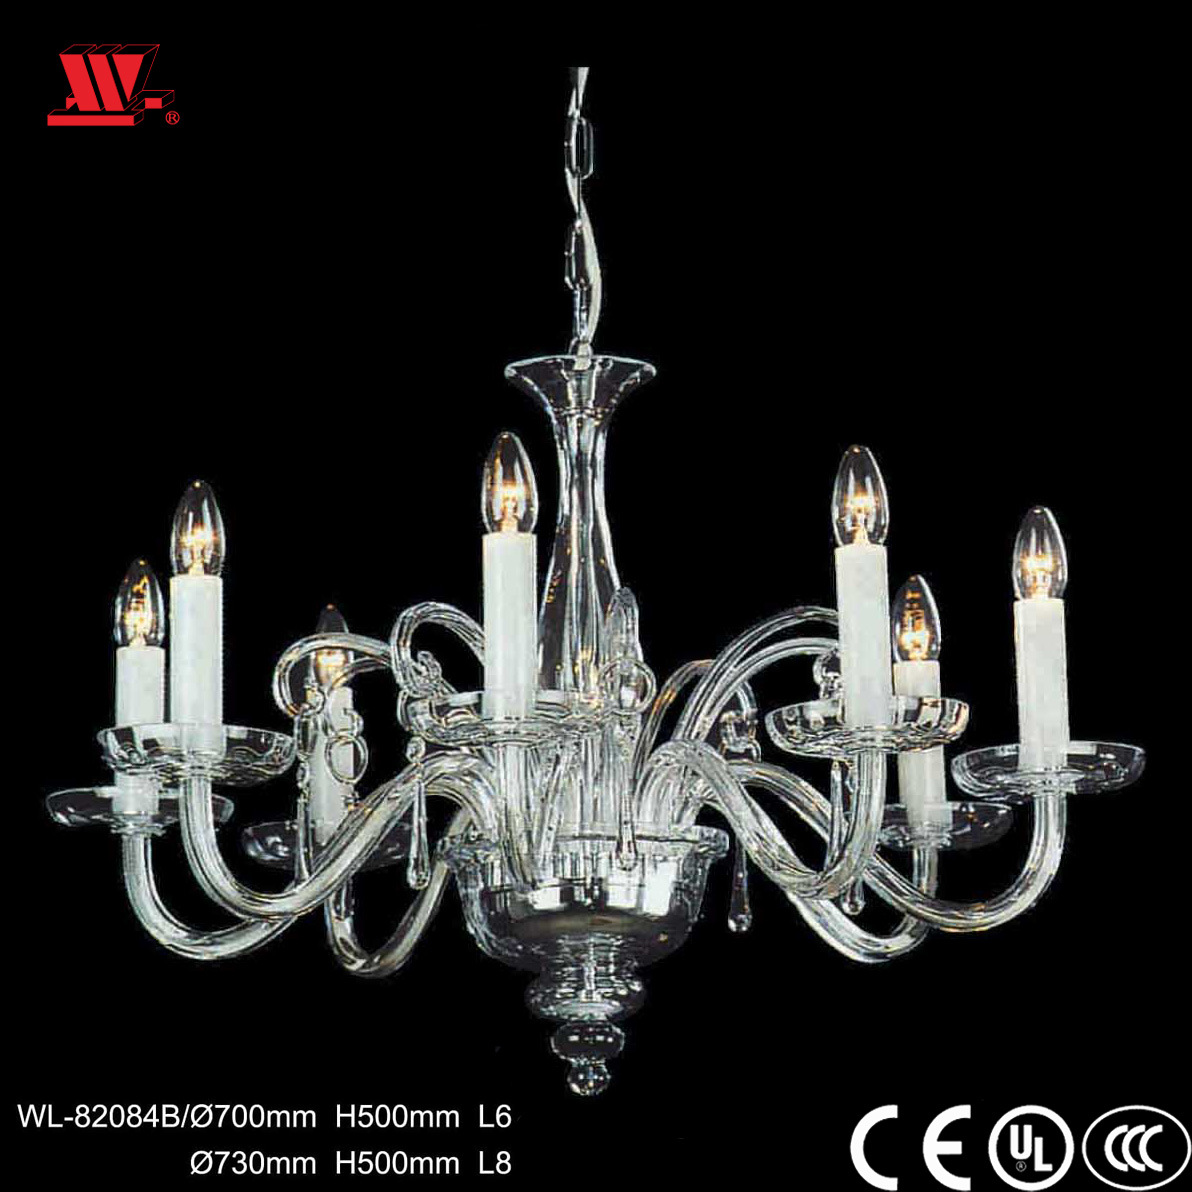 Traditional Crystal Chandelier with Glass Arms Wl-82084b